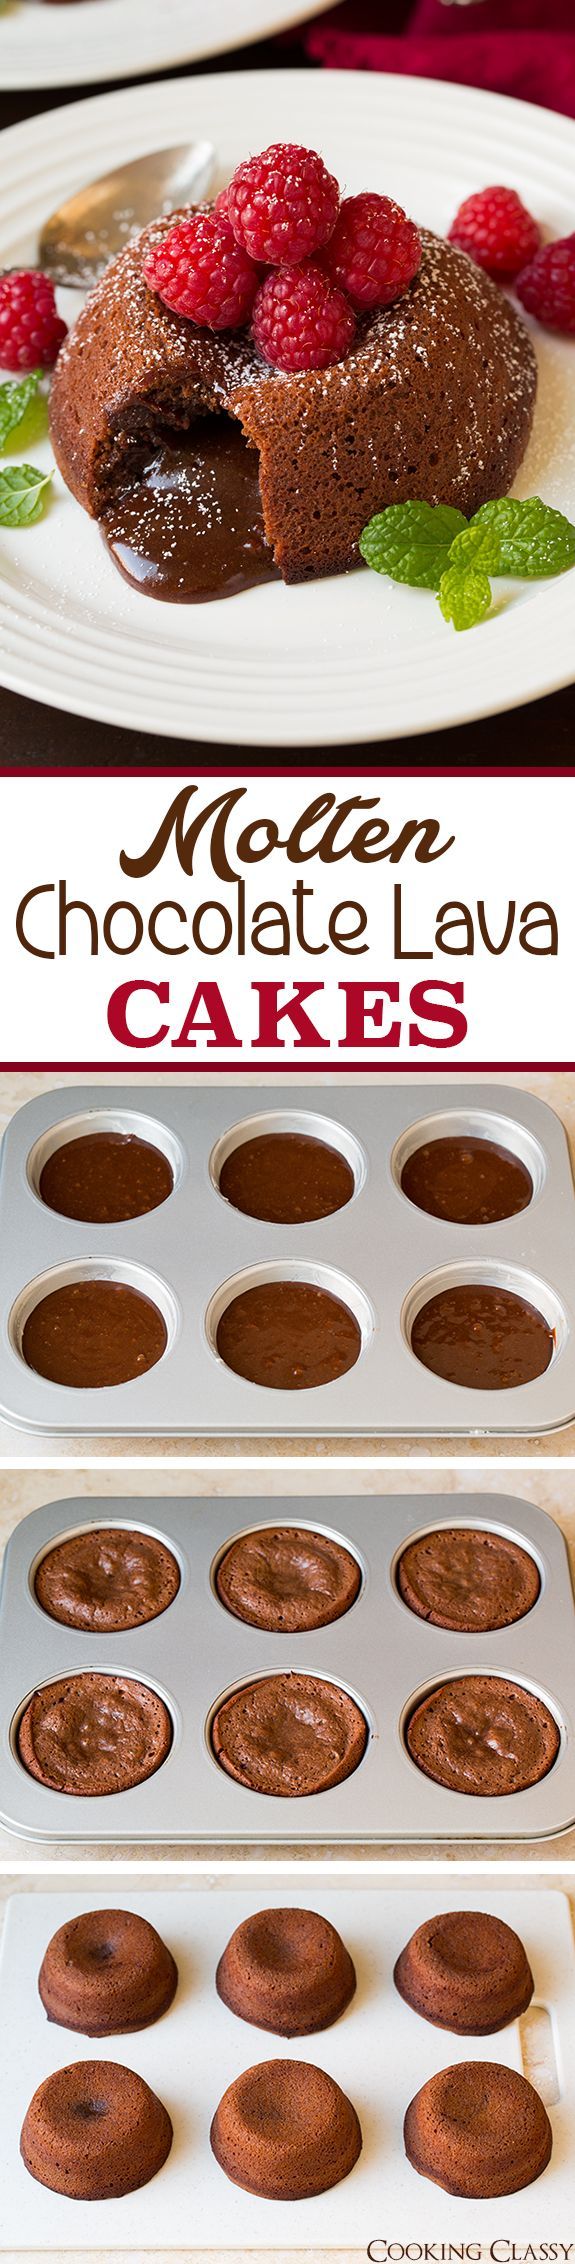 Molten Chocolate Lava Cakes – no mixer required and so easy to make! Deliciously d